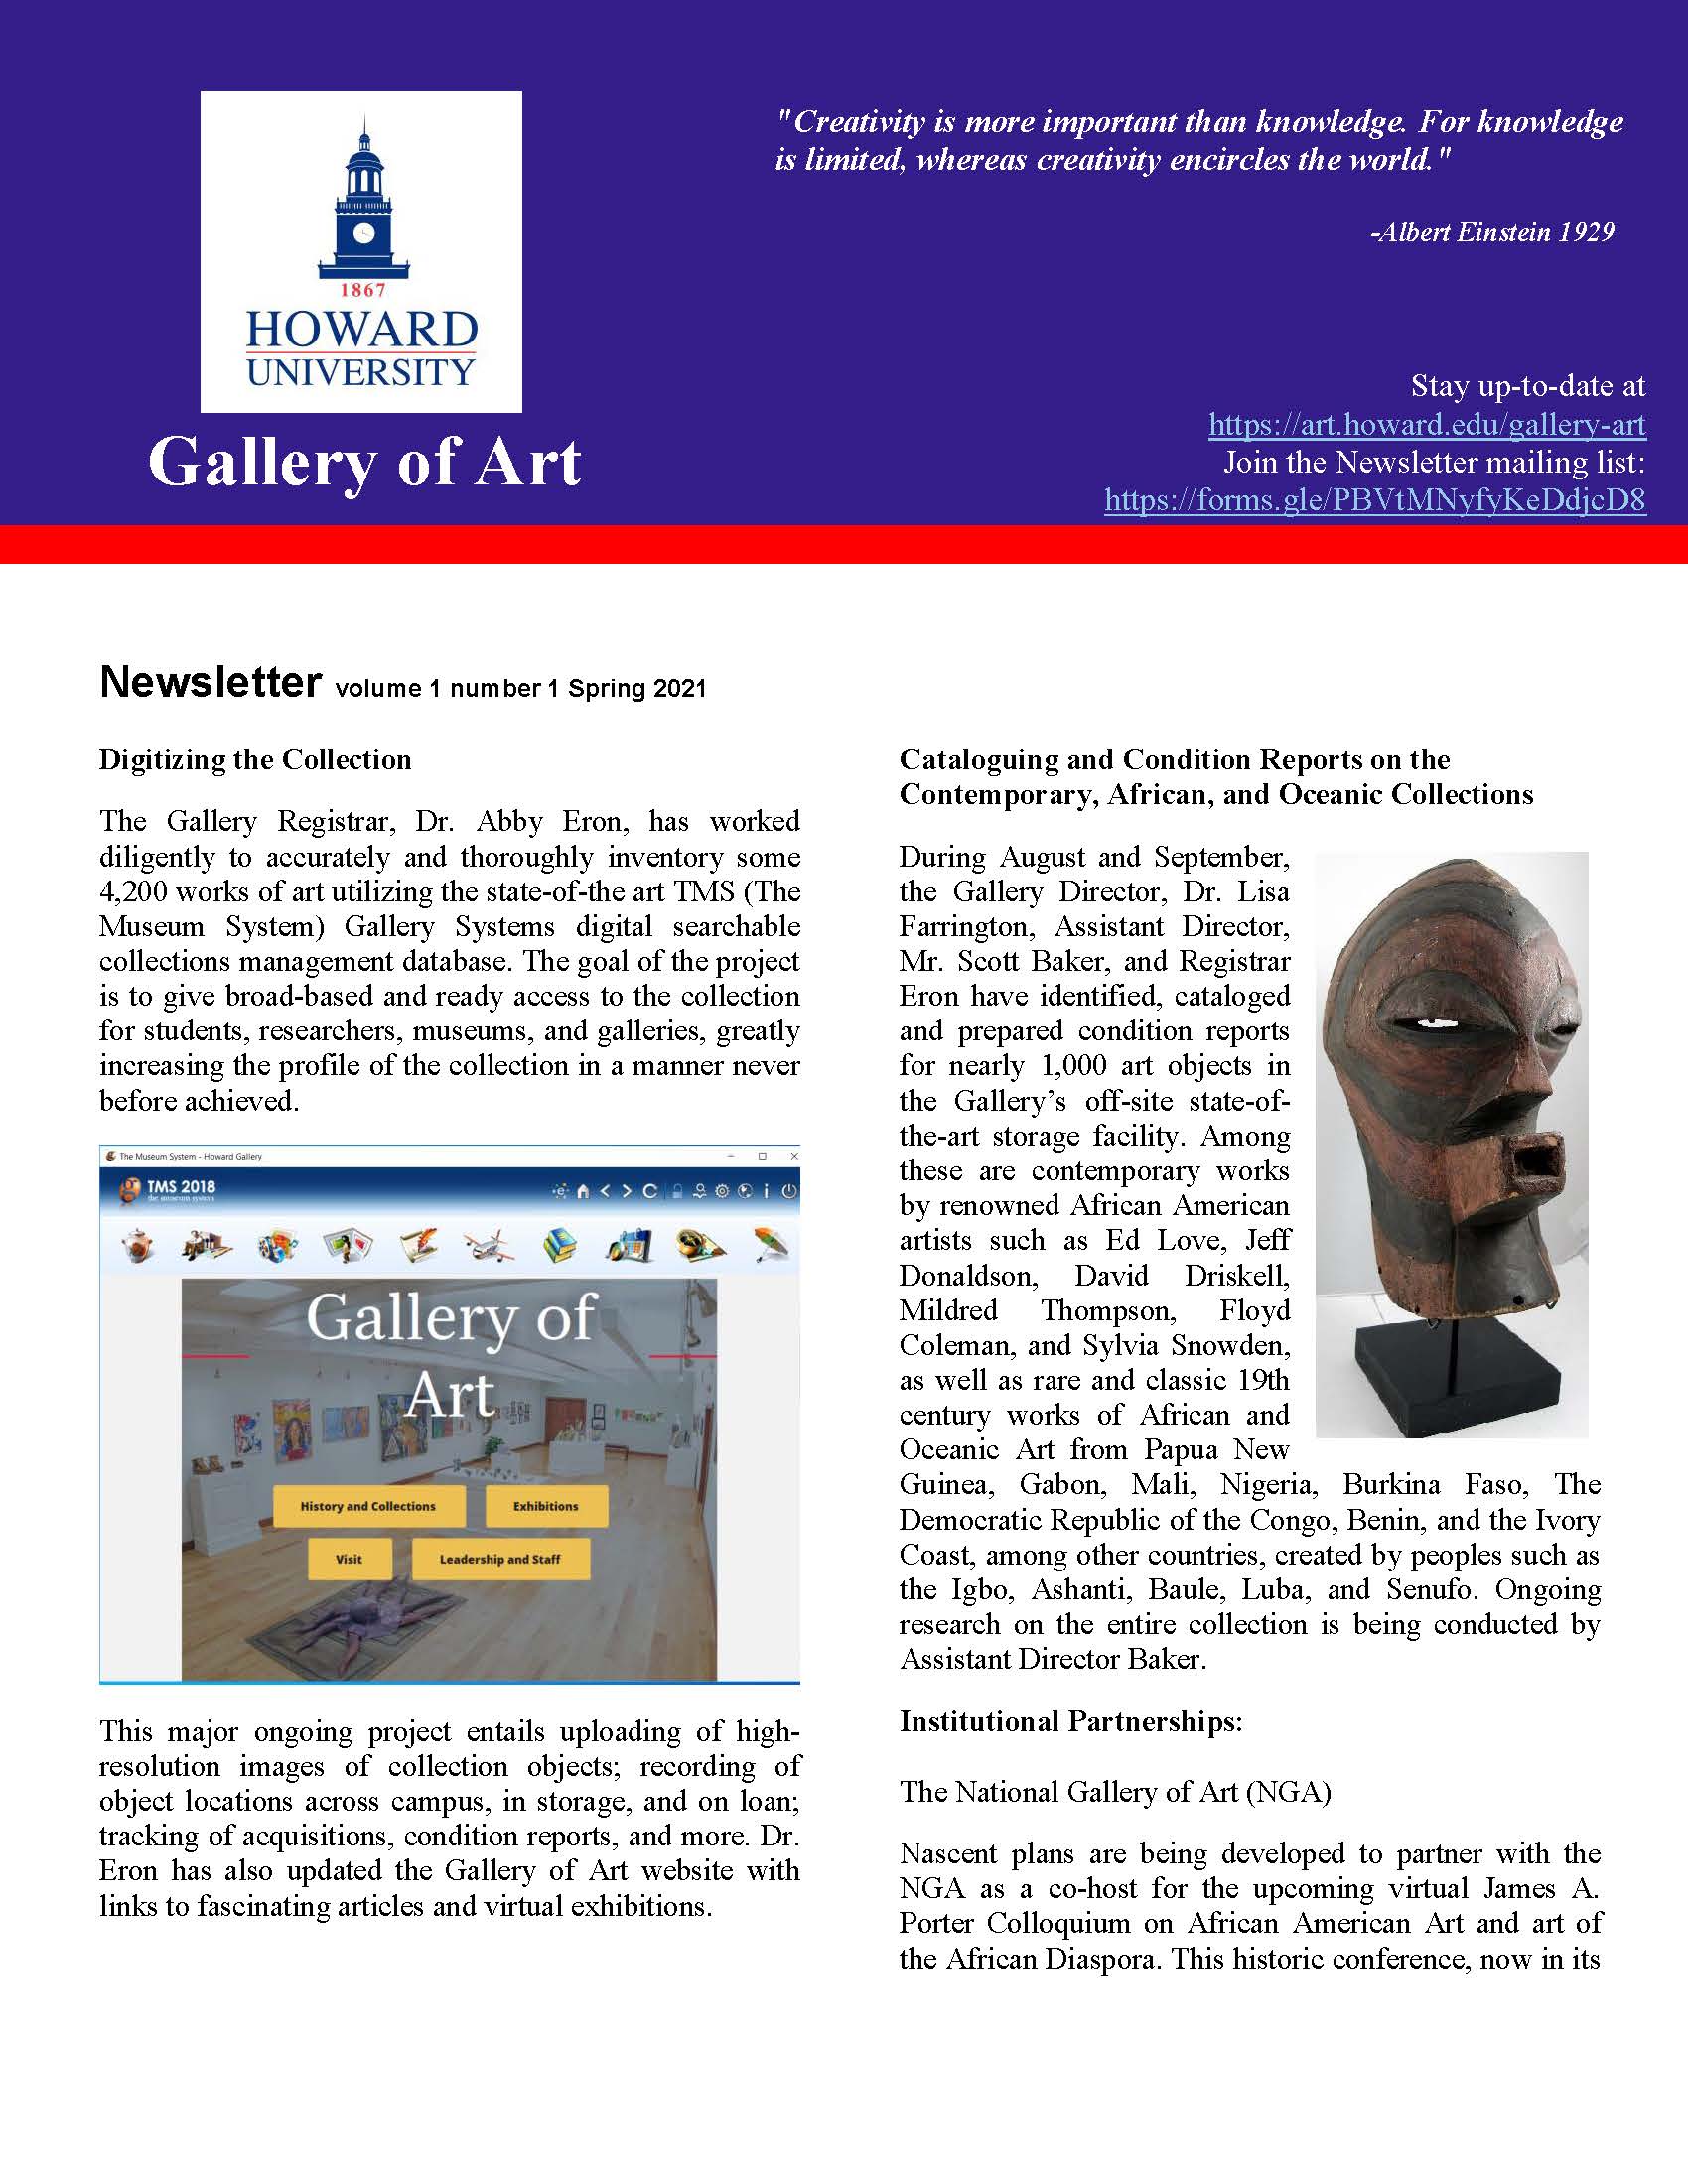 Cover of newsletter vol 1 no 1